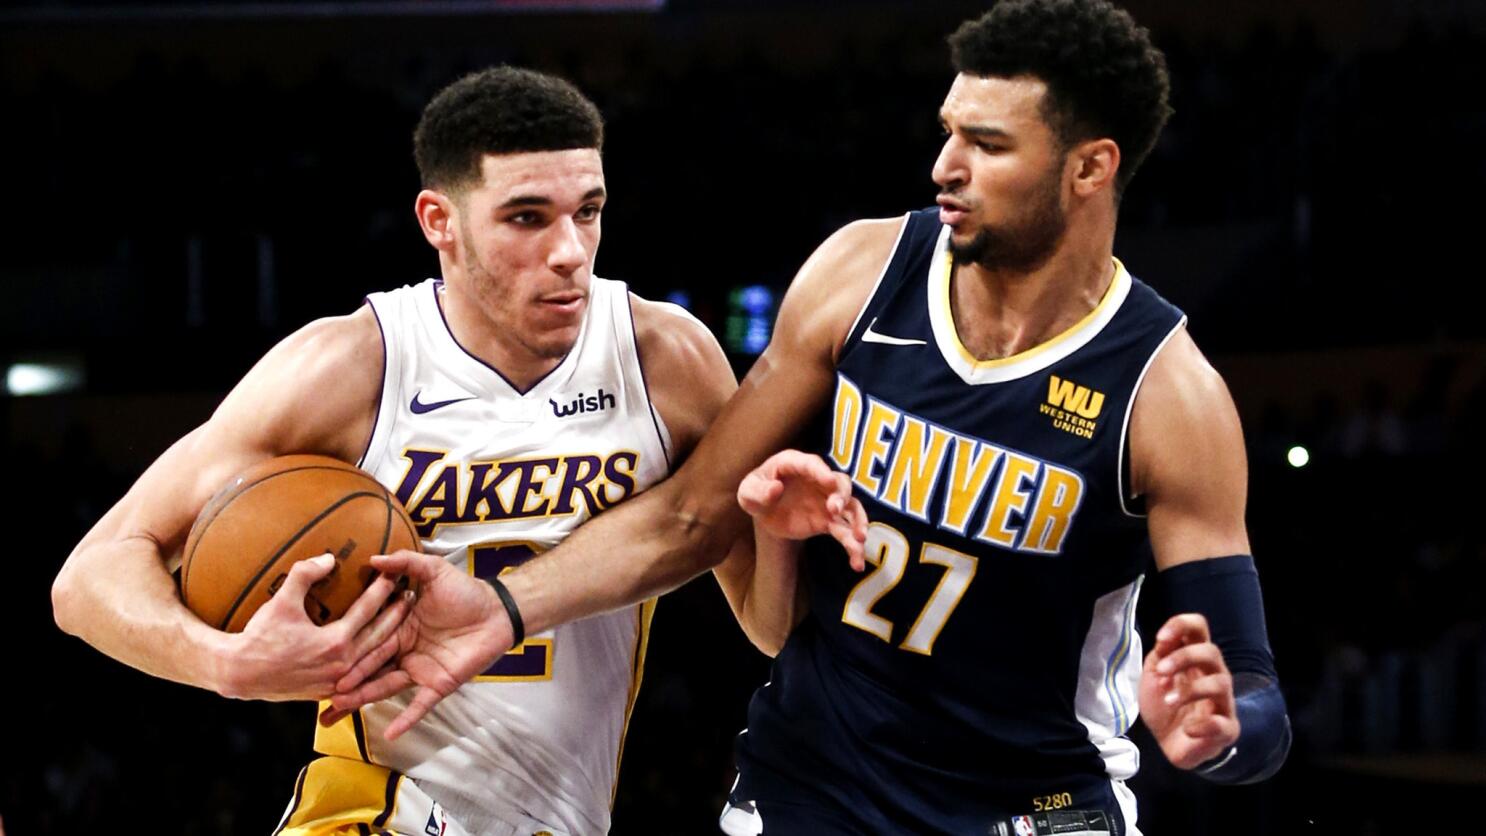 Lakers News: LiAngelo Ball says Lonzo Ball has 'helped a lot